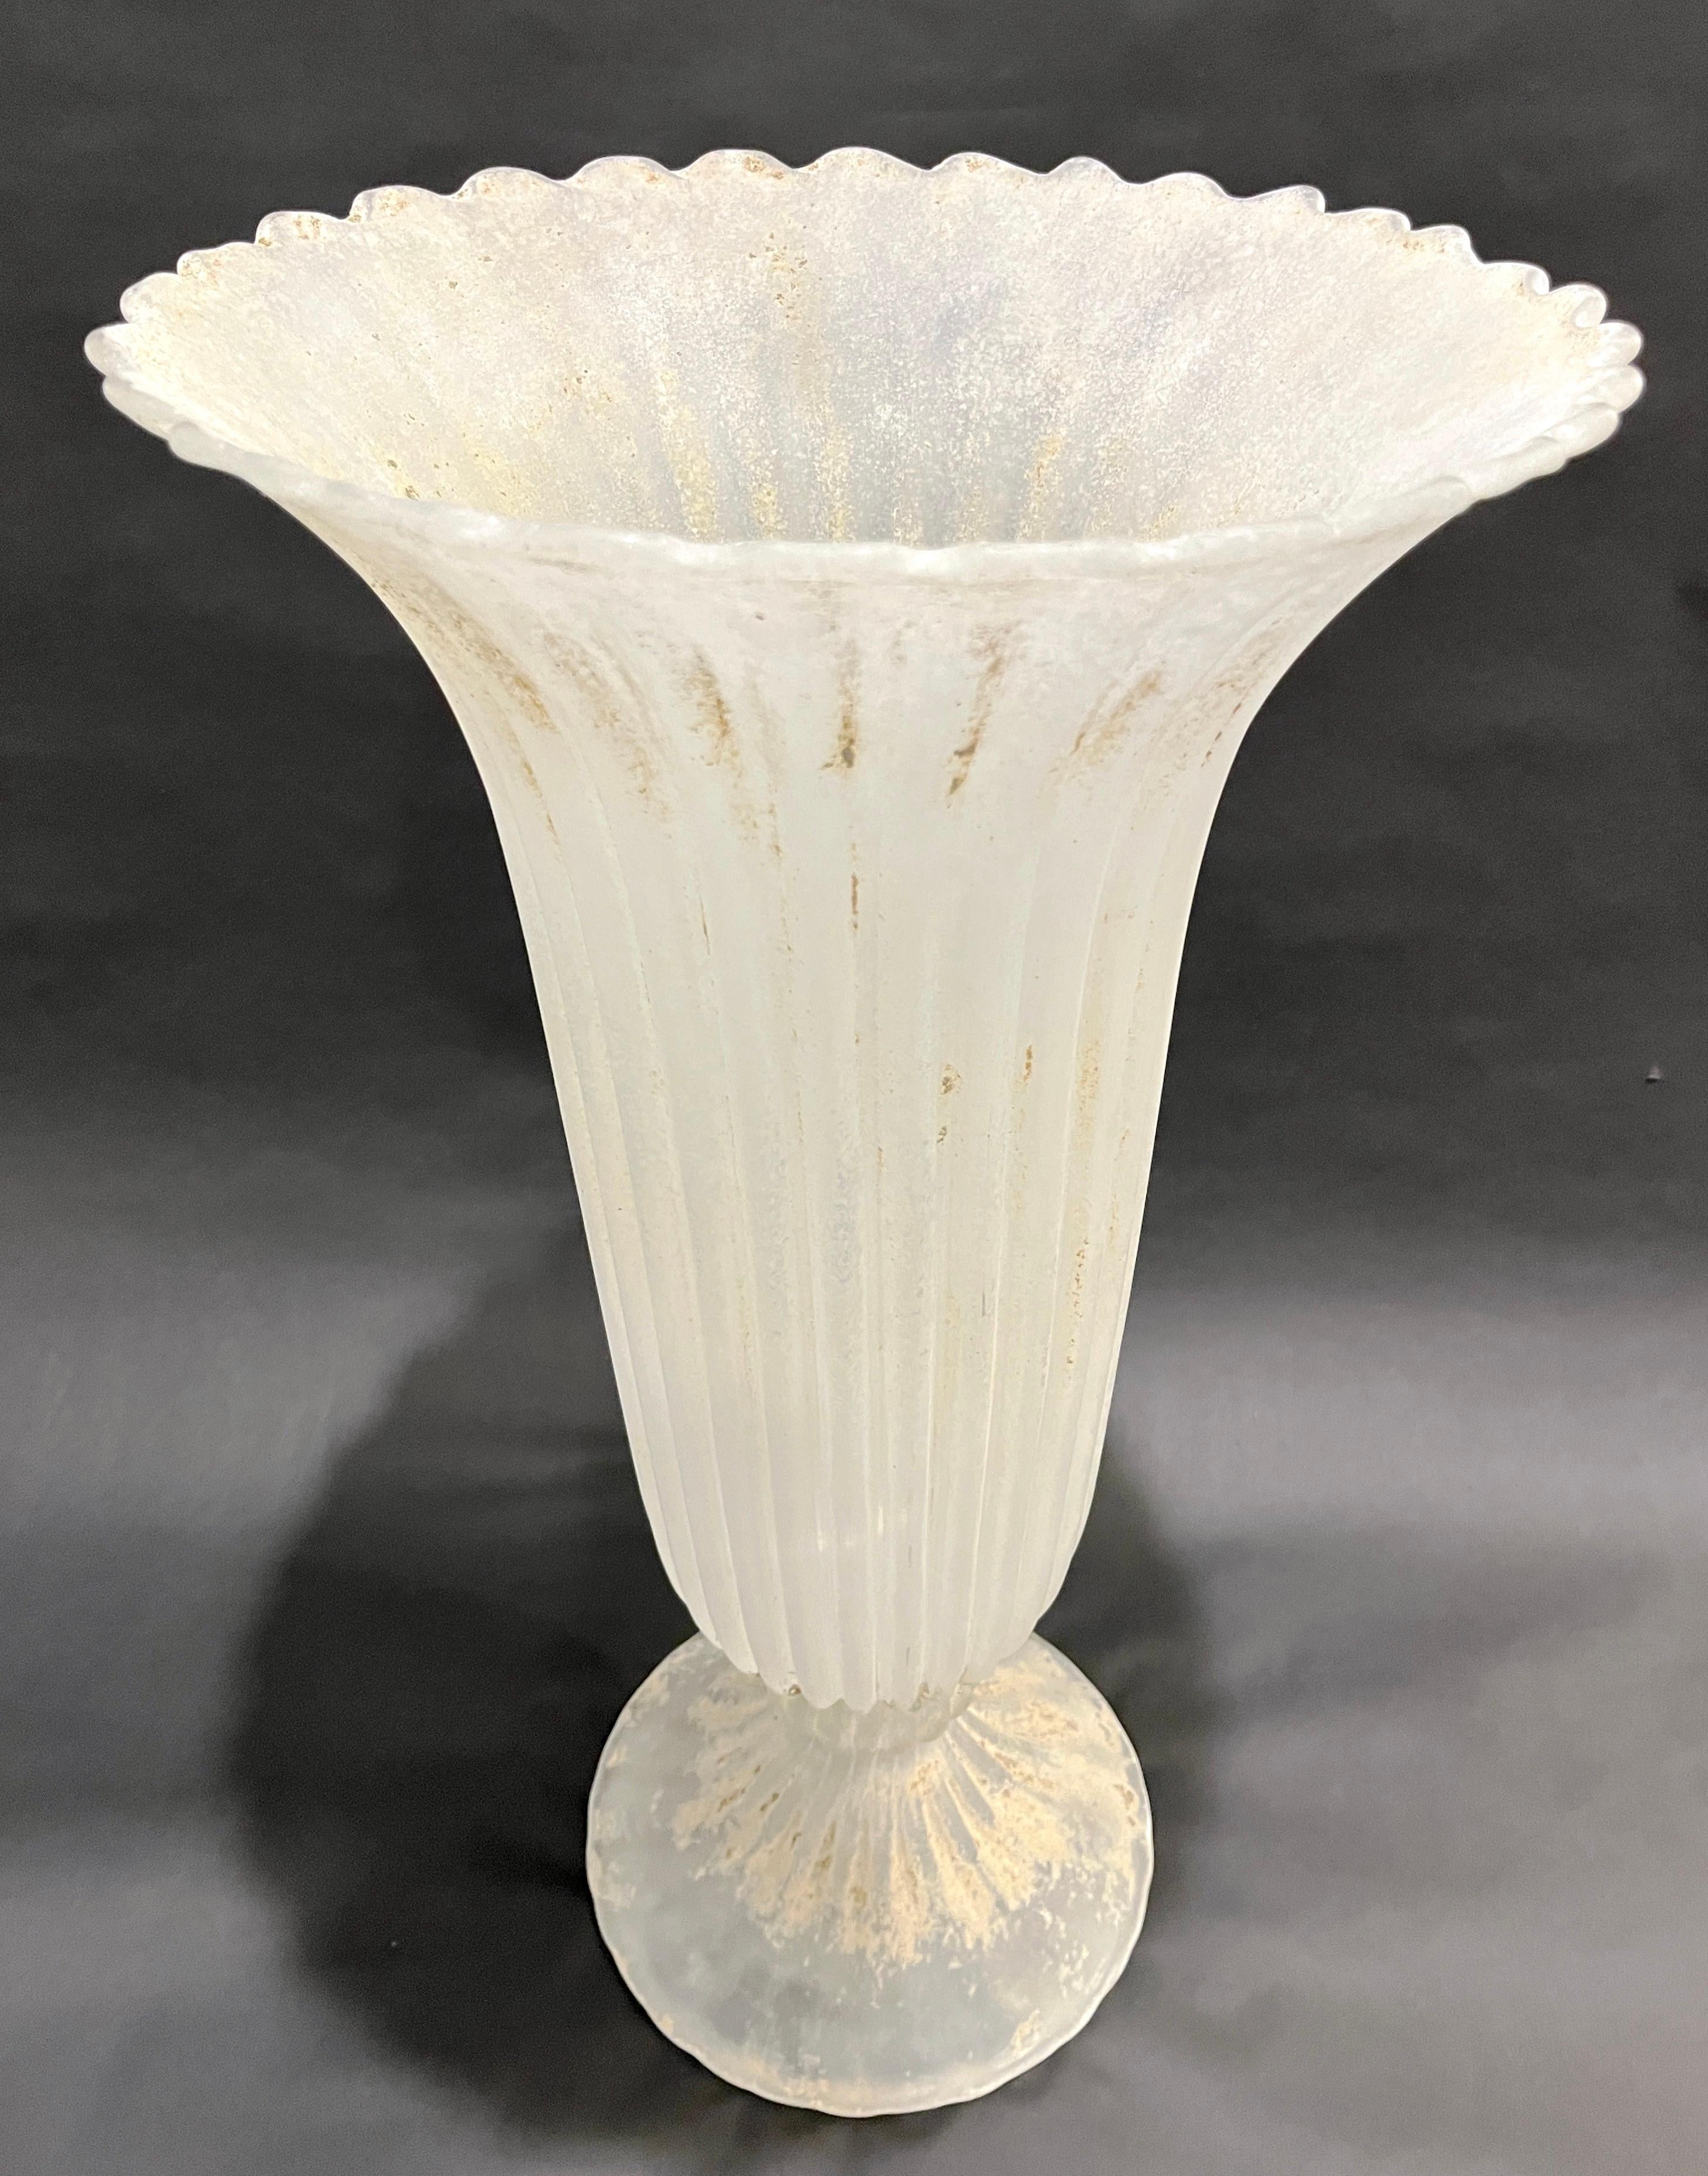 A rare Italian mid-century modern organic Murano glass elegant tall vase, with a Florentine neoclassical shape, by Seguso, precious because worked with an exceptional Scavo technique that gives an unusual stone antique look as if the piece had been